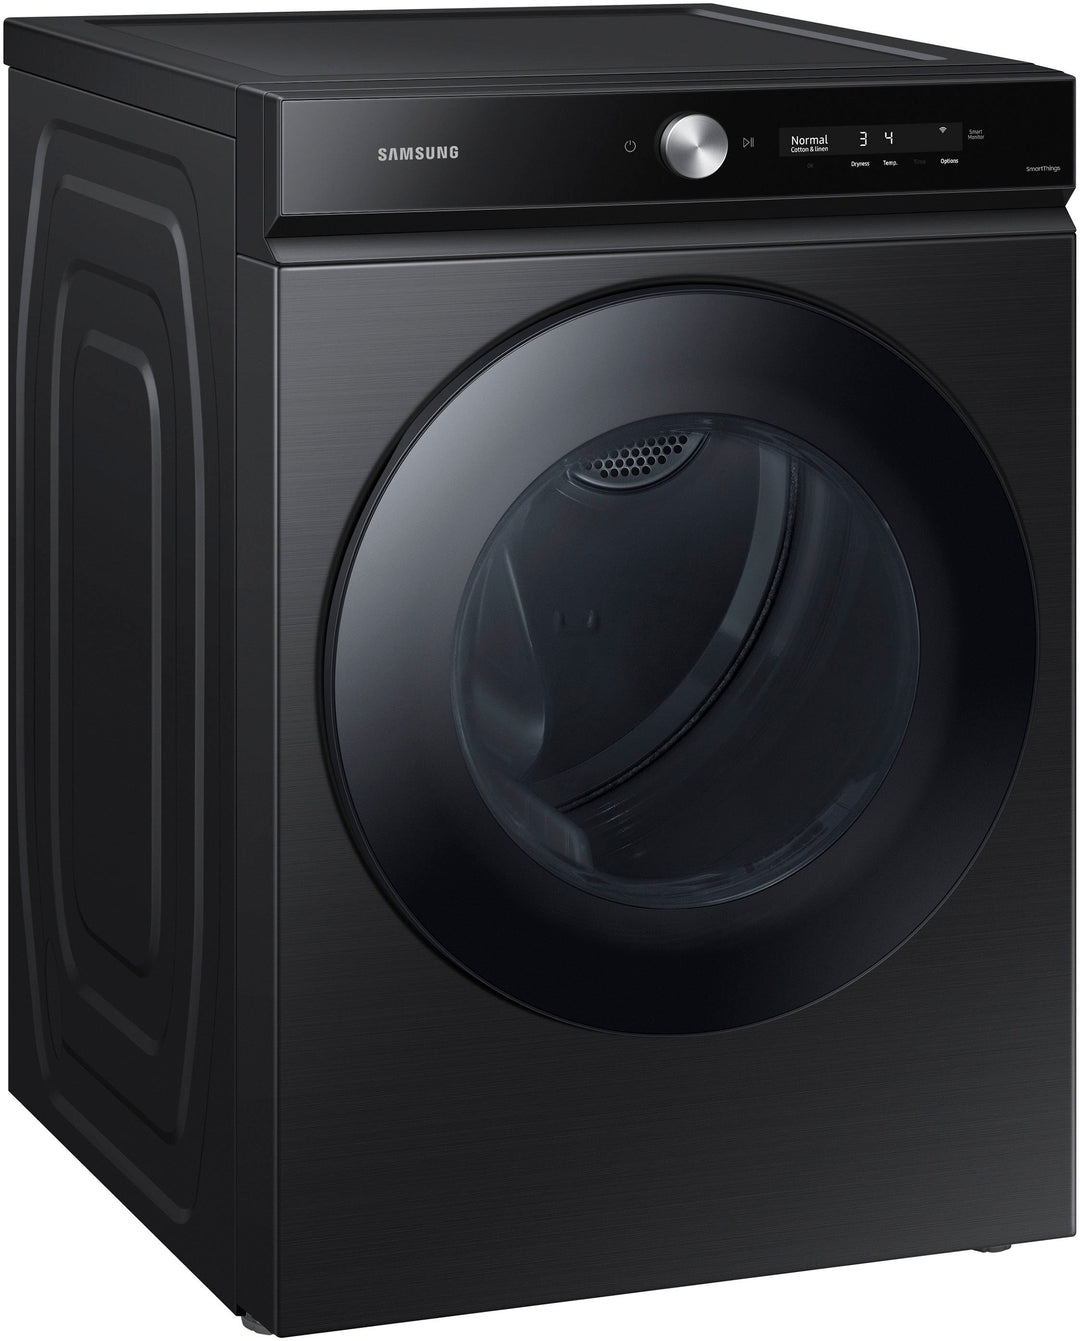 Samsung - Bespoke 7.6 cu. ft. Ultra Capacity Gas Dryer with Super Speed Dry and AI Smart Dial - Brushed black_4